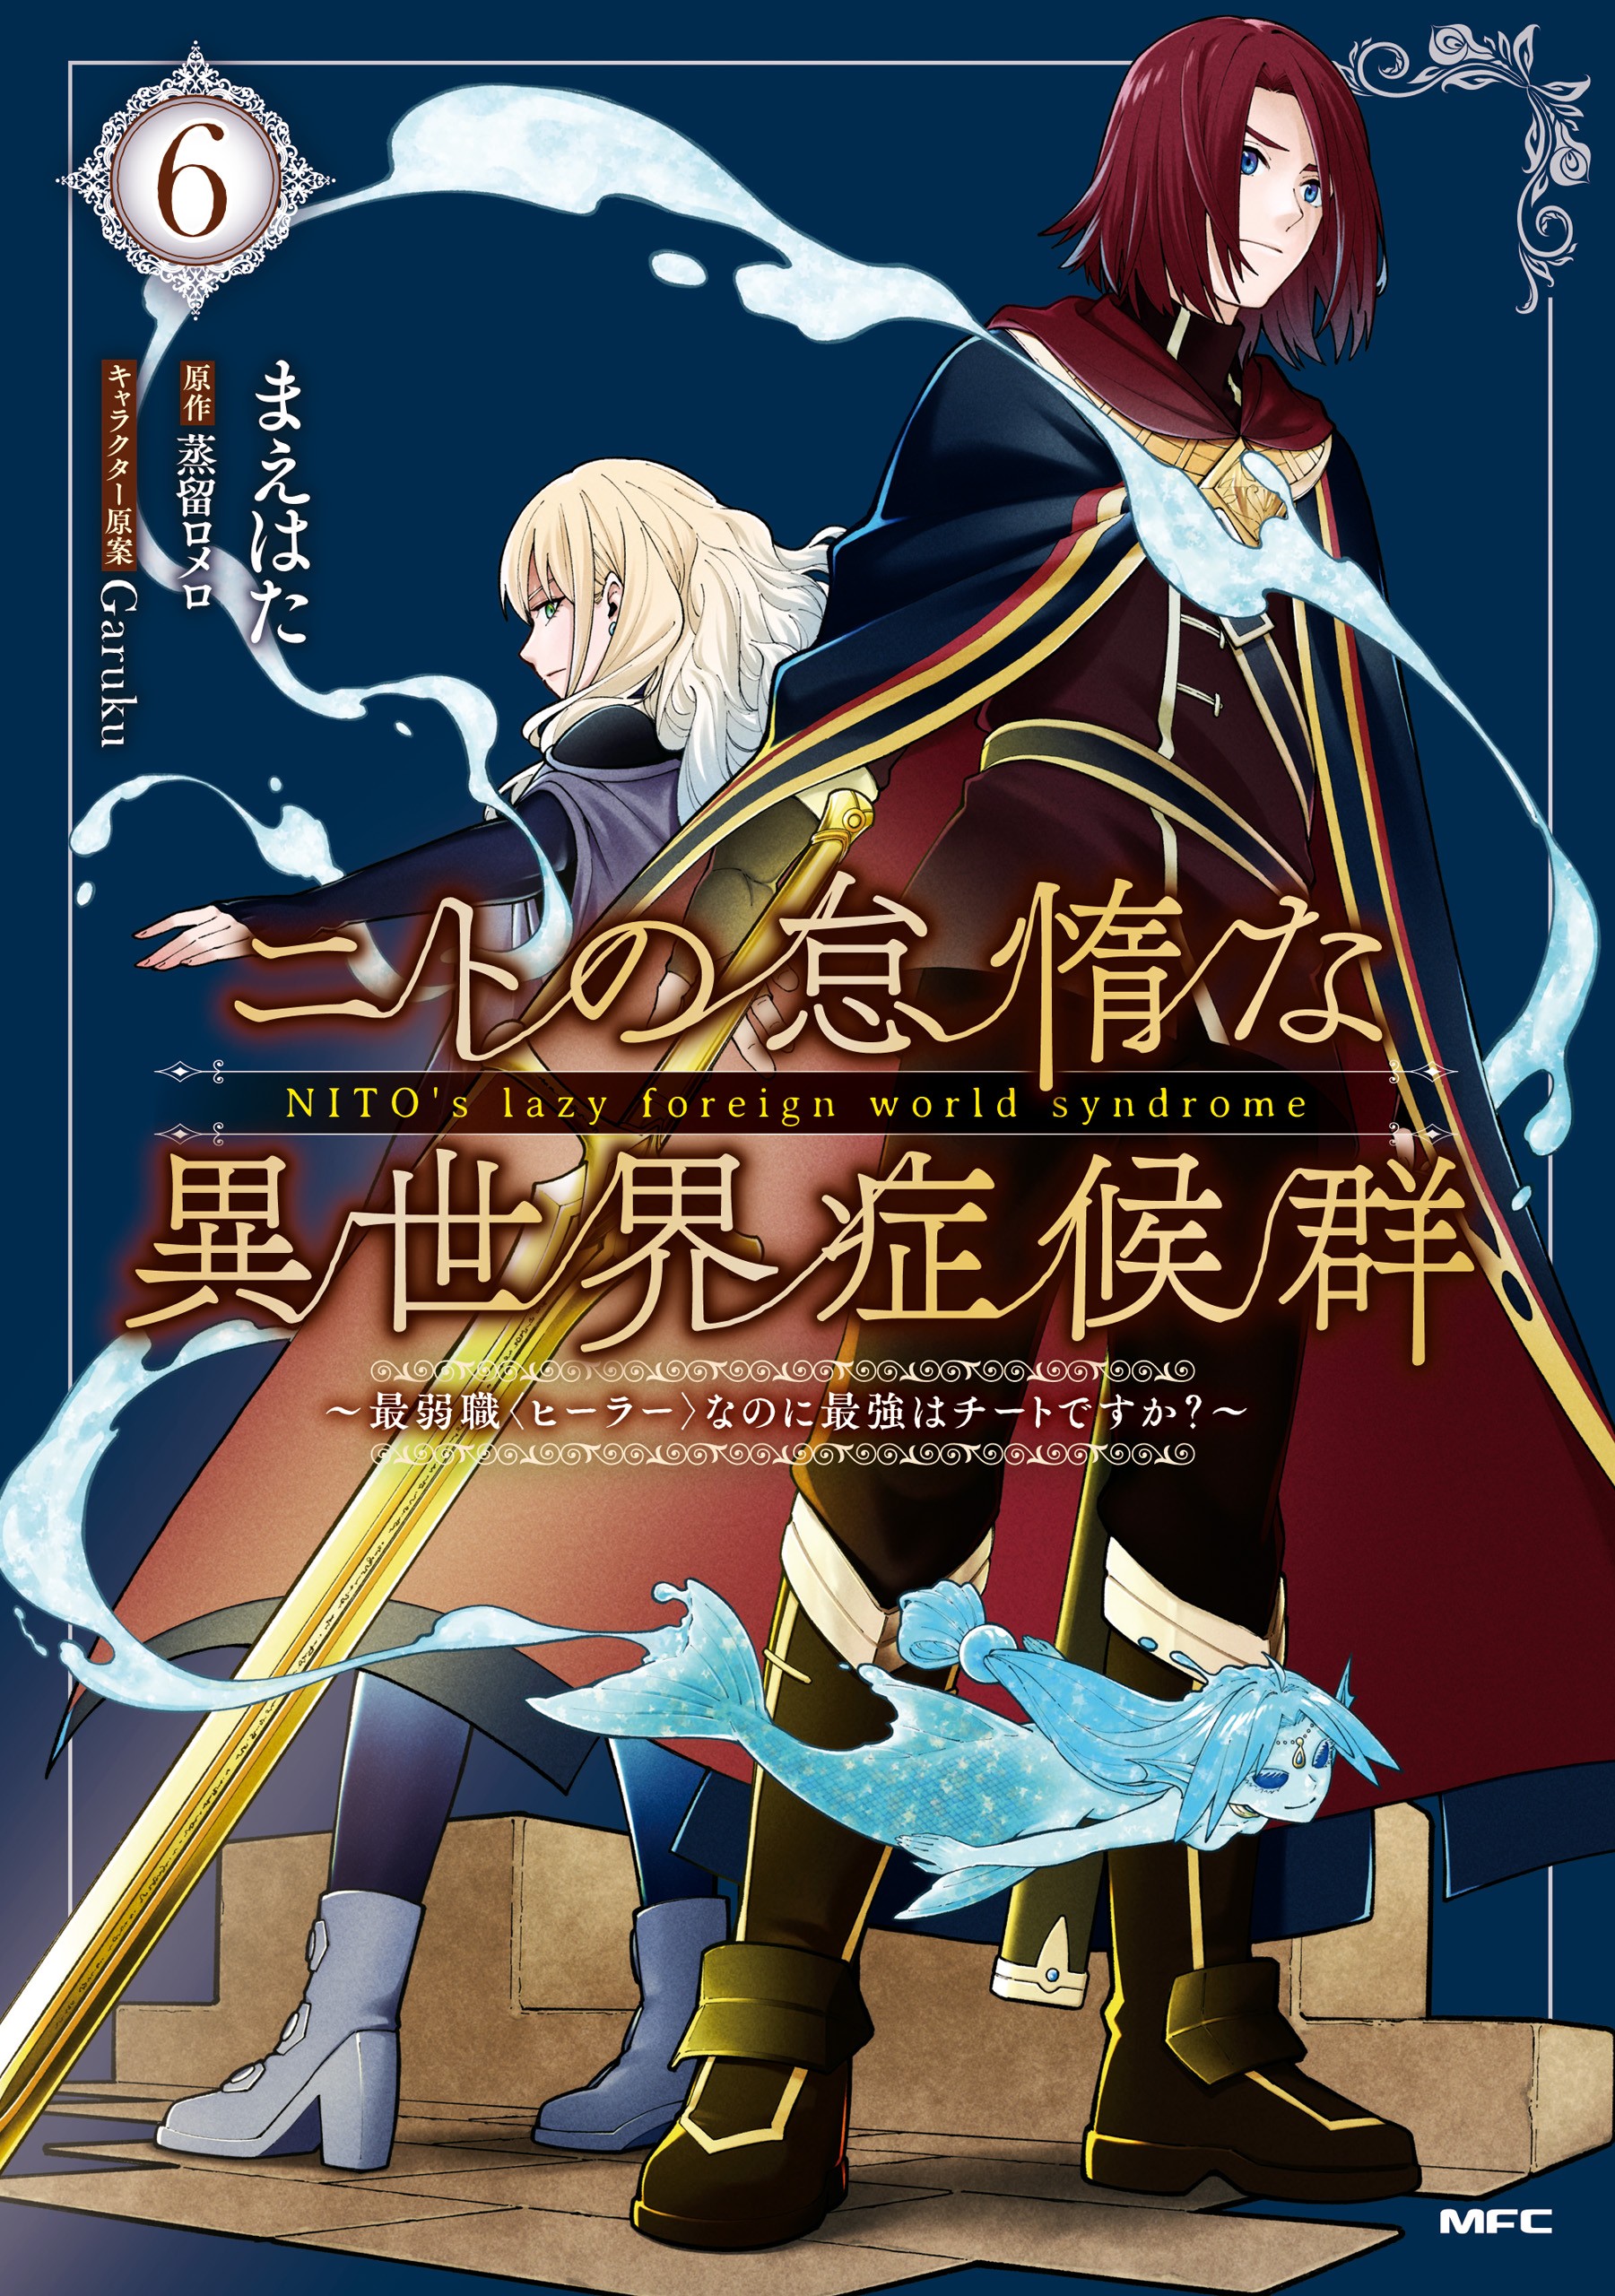 Isekai Cheat Magician Episode 1 Discussion (50 - ) - Forums